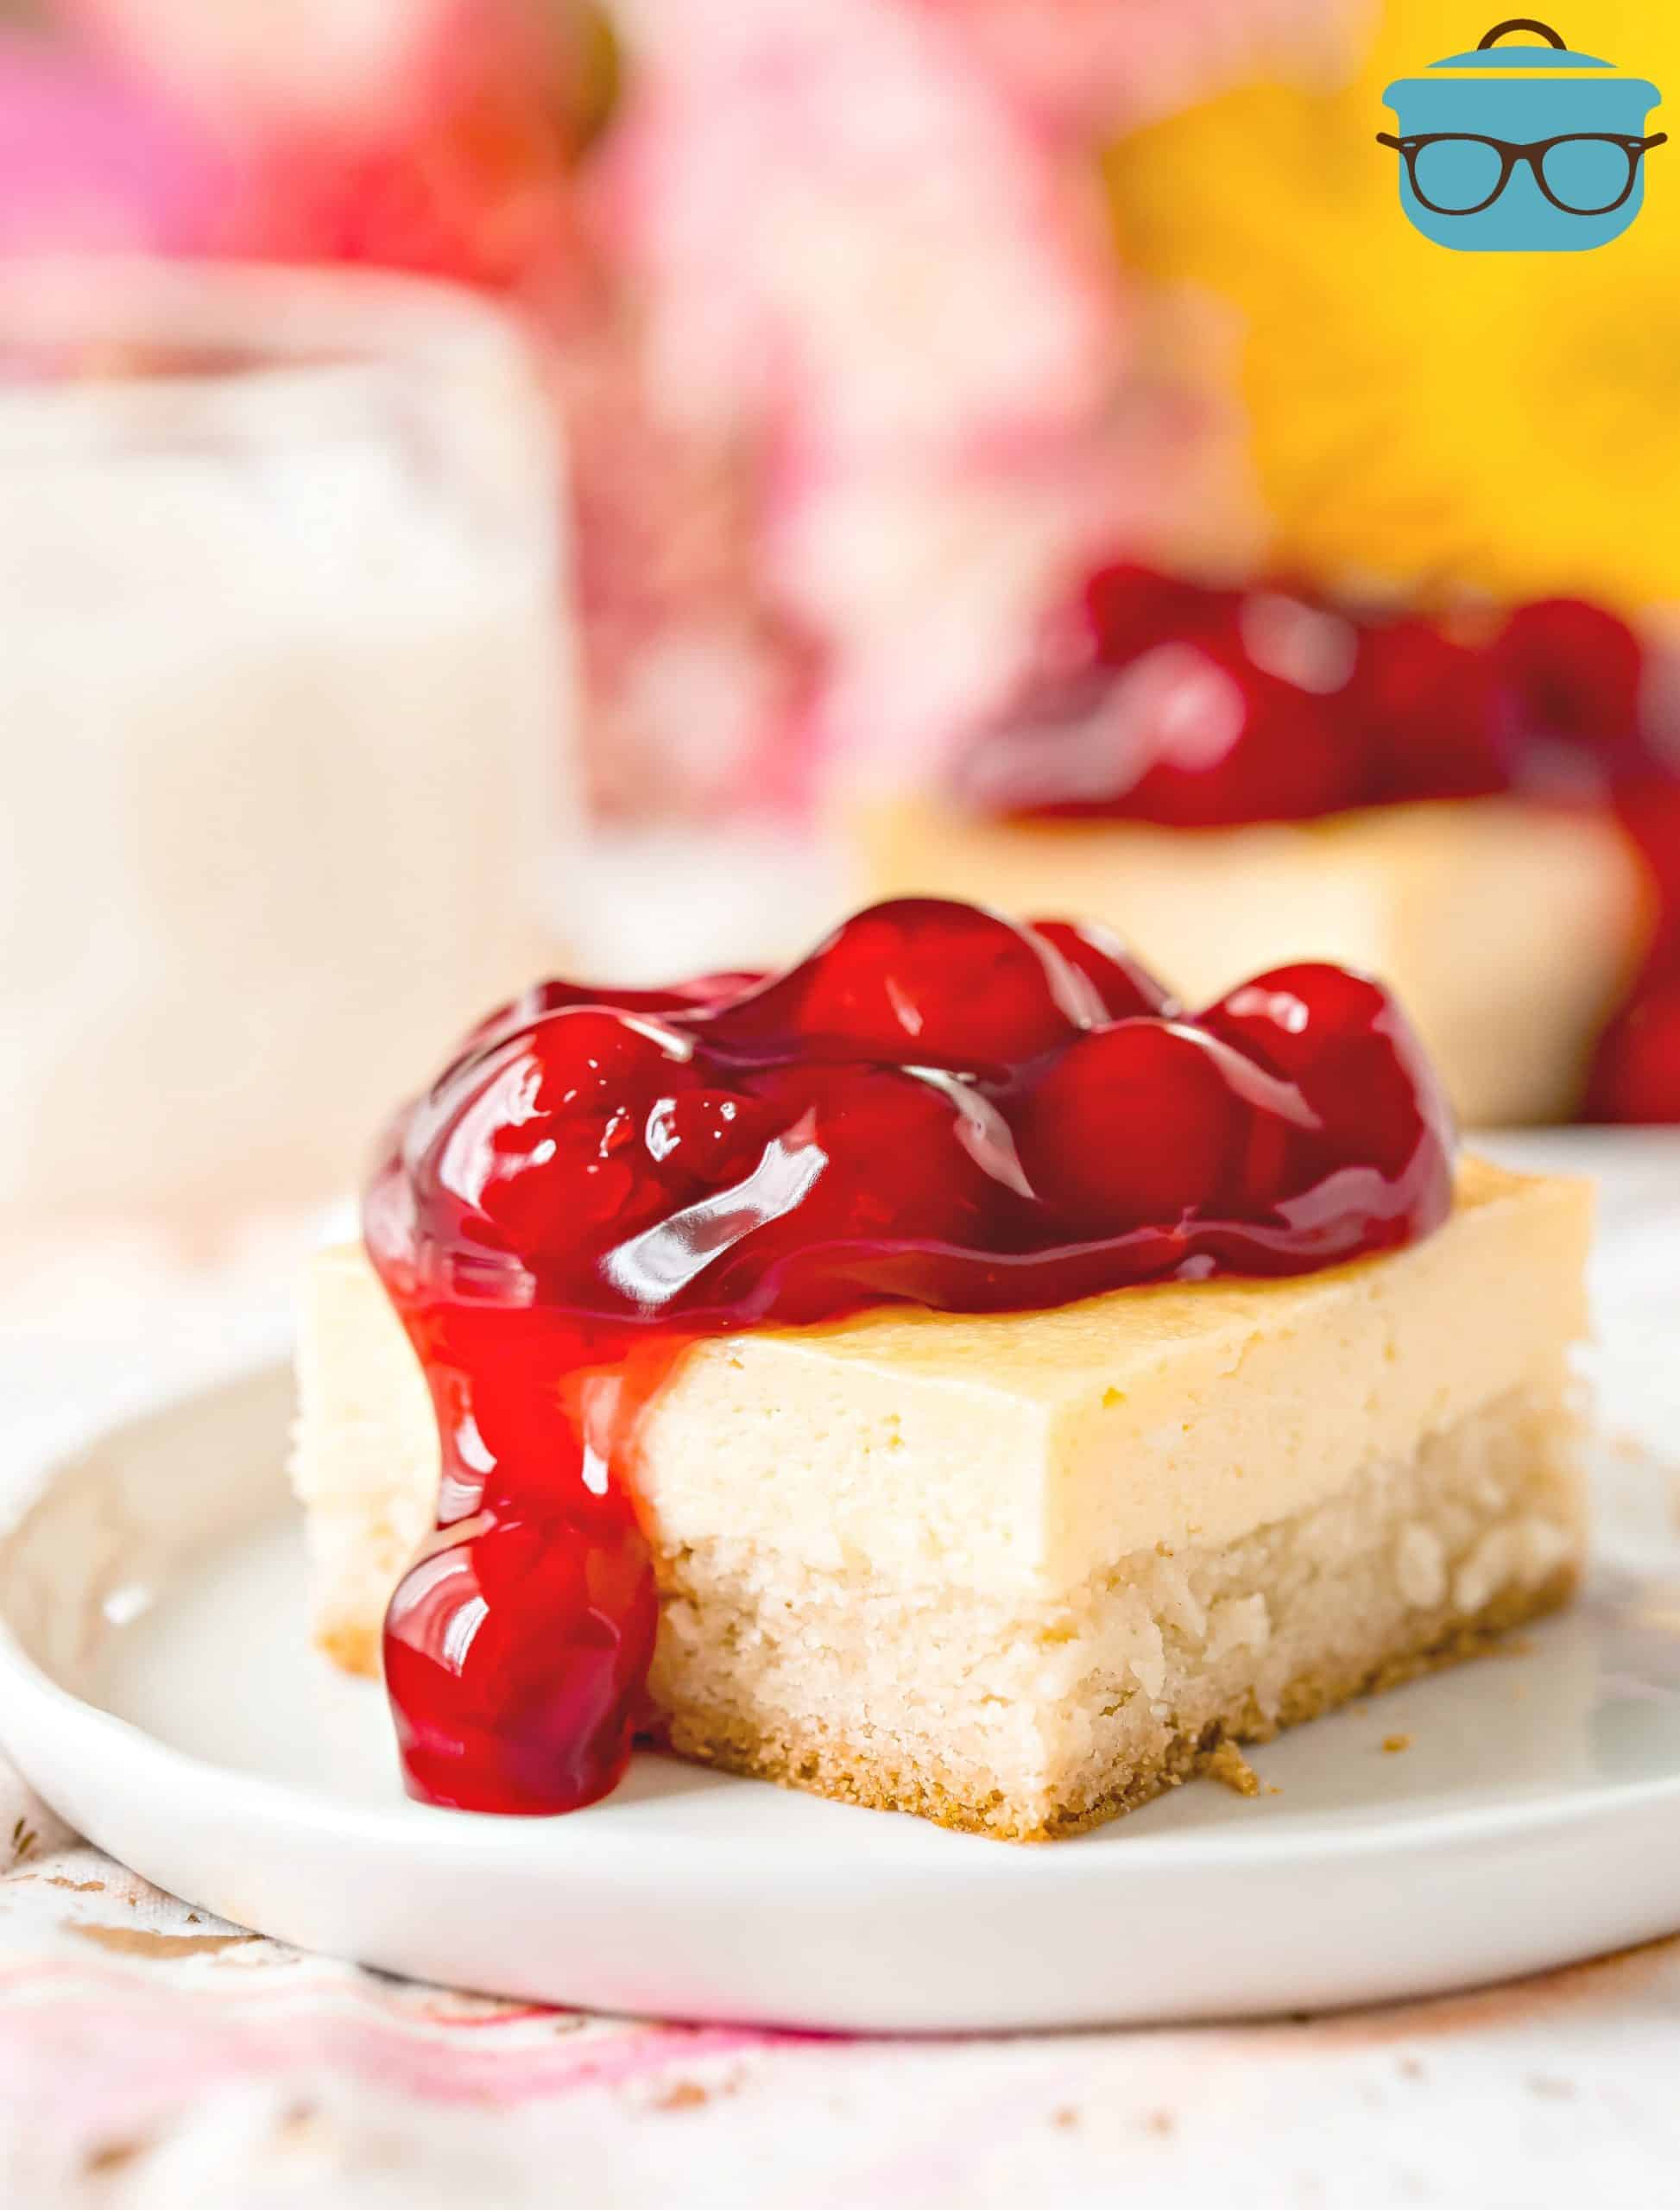 Sugar Cookie Cherry Cheesecake Bar, shown sliced on a white plate with cherry pie filling topping.